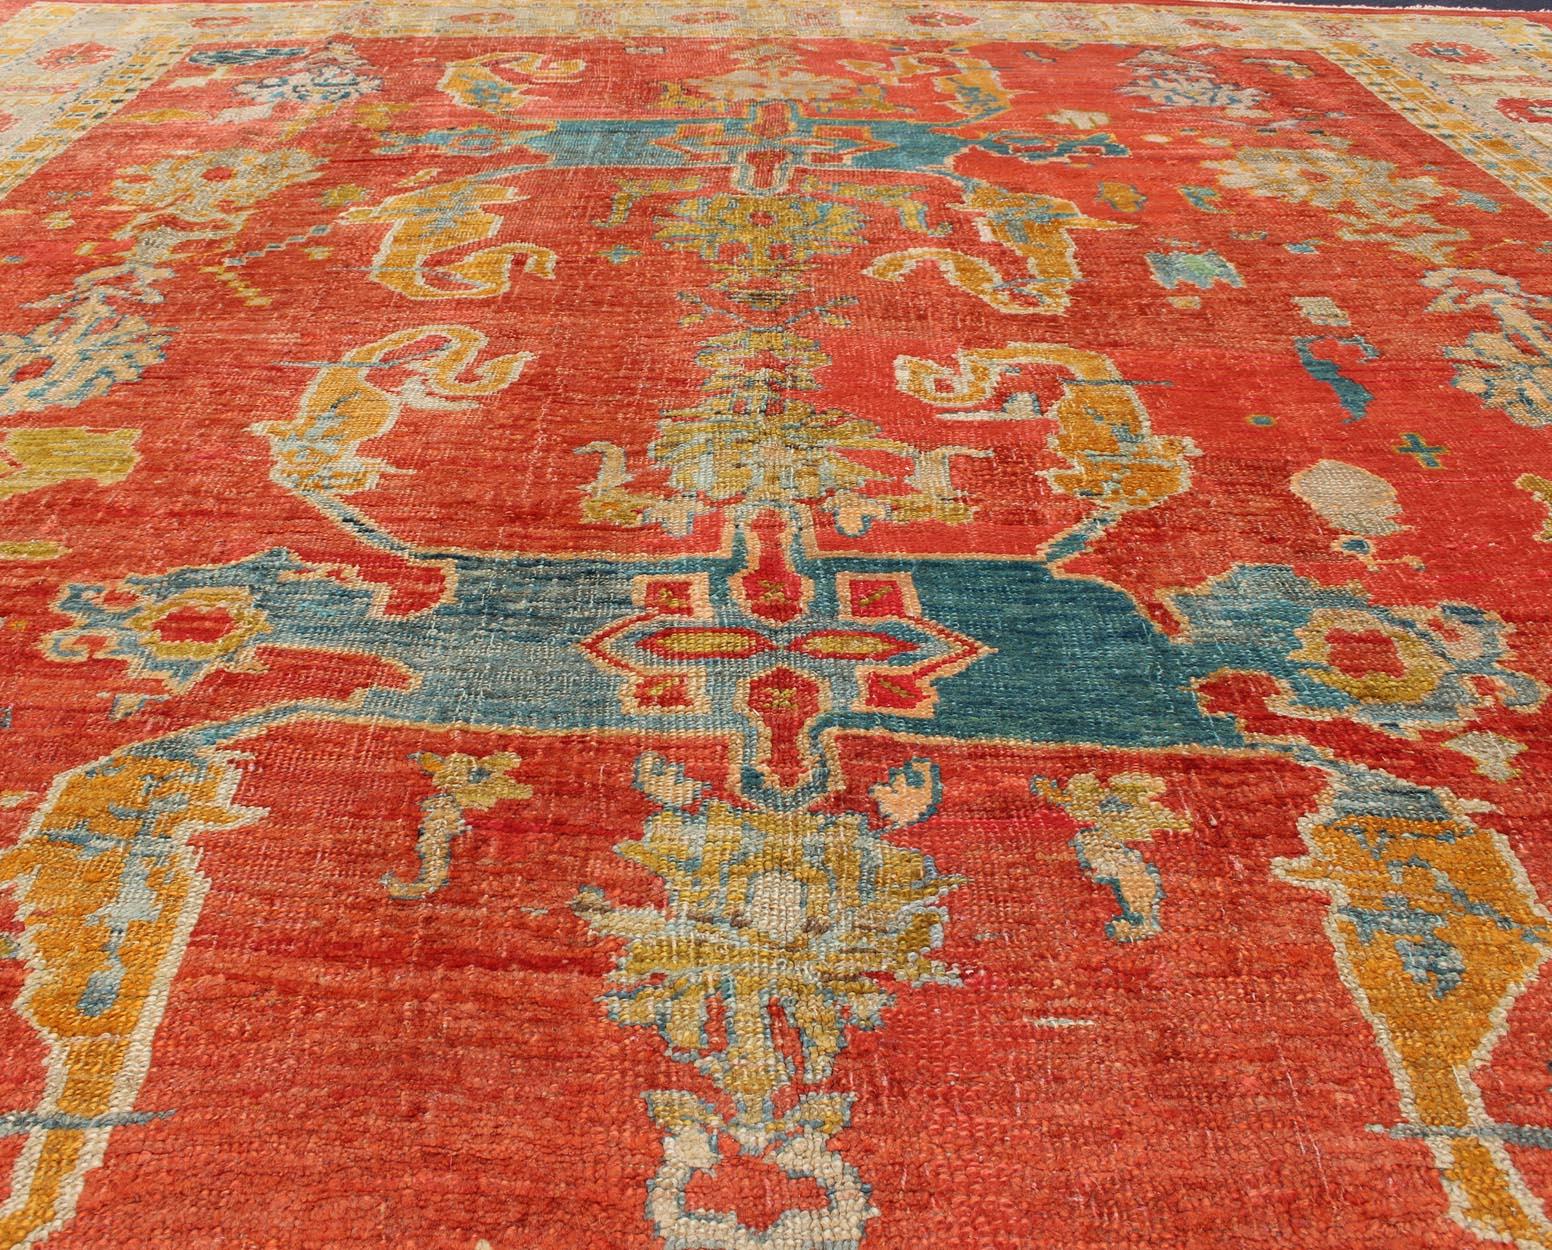 Late 19th Century 19th Century Oushak with Tribal Design in Orange Red, Blue, L. Green, Ice Blue For Sale